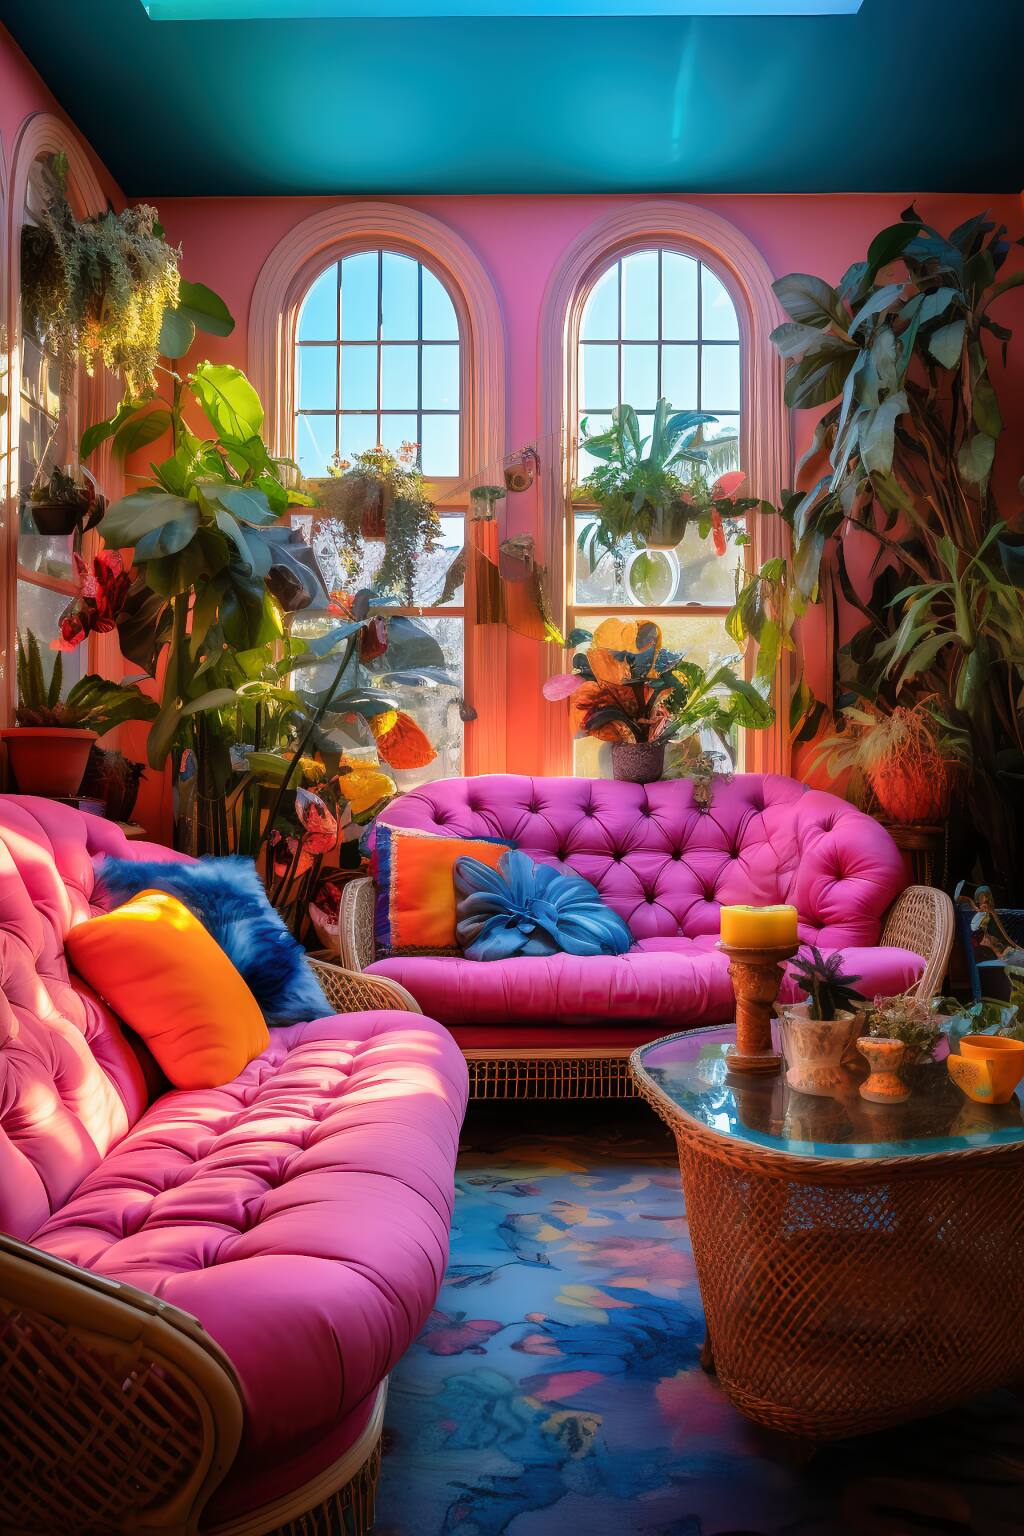 Vibrant Bohemian Living Room In Pink And Turquoise, Featuring A Tufted Ottoman, Peacock Chair, And Layered Textiles.